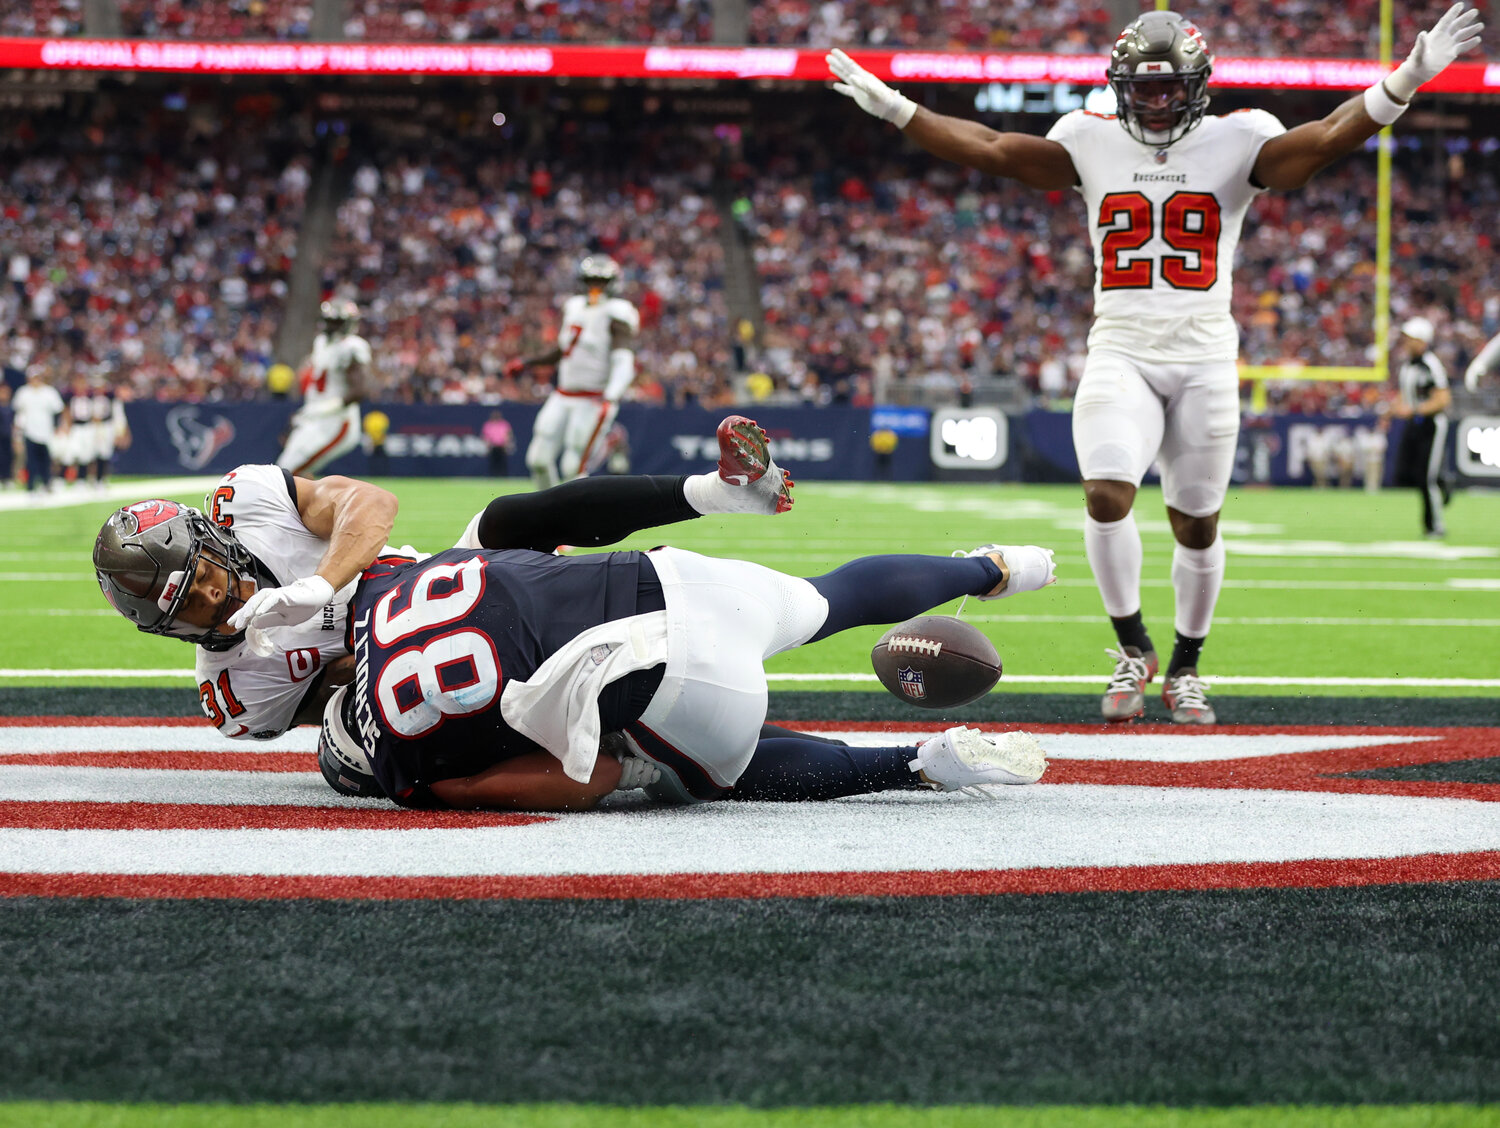 Buccaneers safety Christian Izien (29) reacts as Texans tight end Dalton Schultz (86) drops a would-be touchdown pass in the end zone during an NFL game between the Houston Texans and the Tampa Bay Buccaneers on November 5, 2023 in Houston.